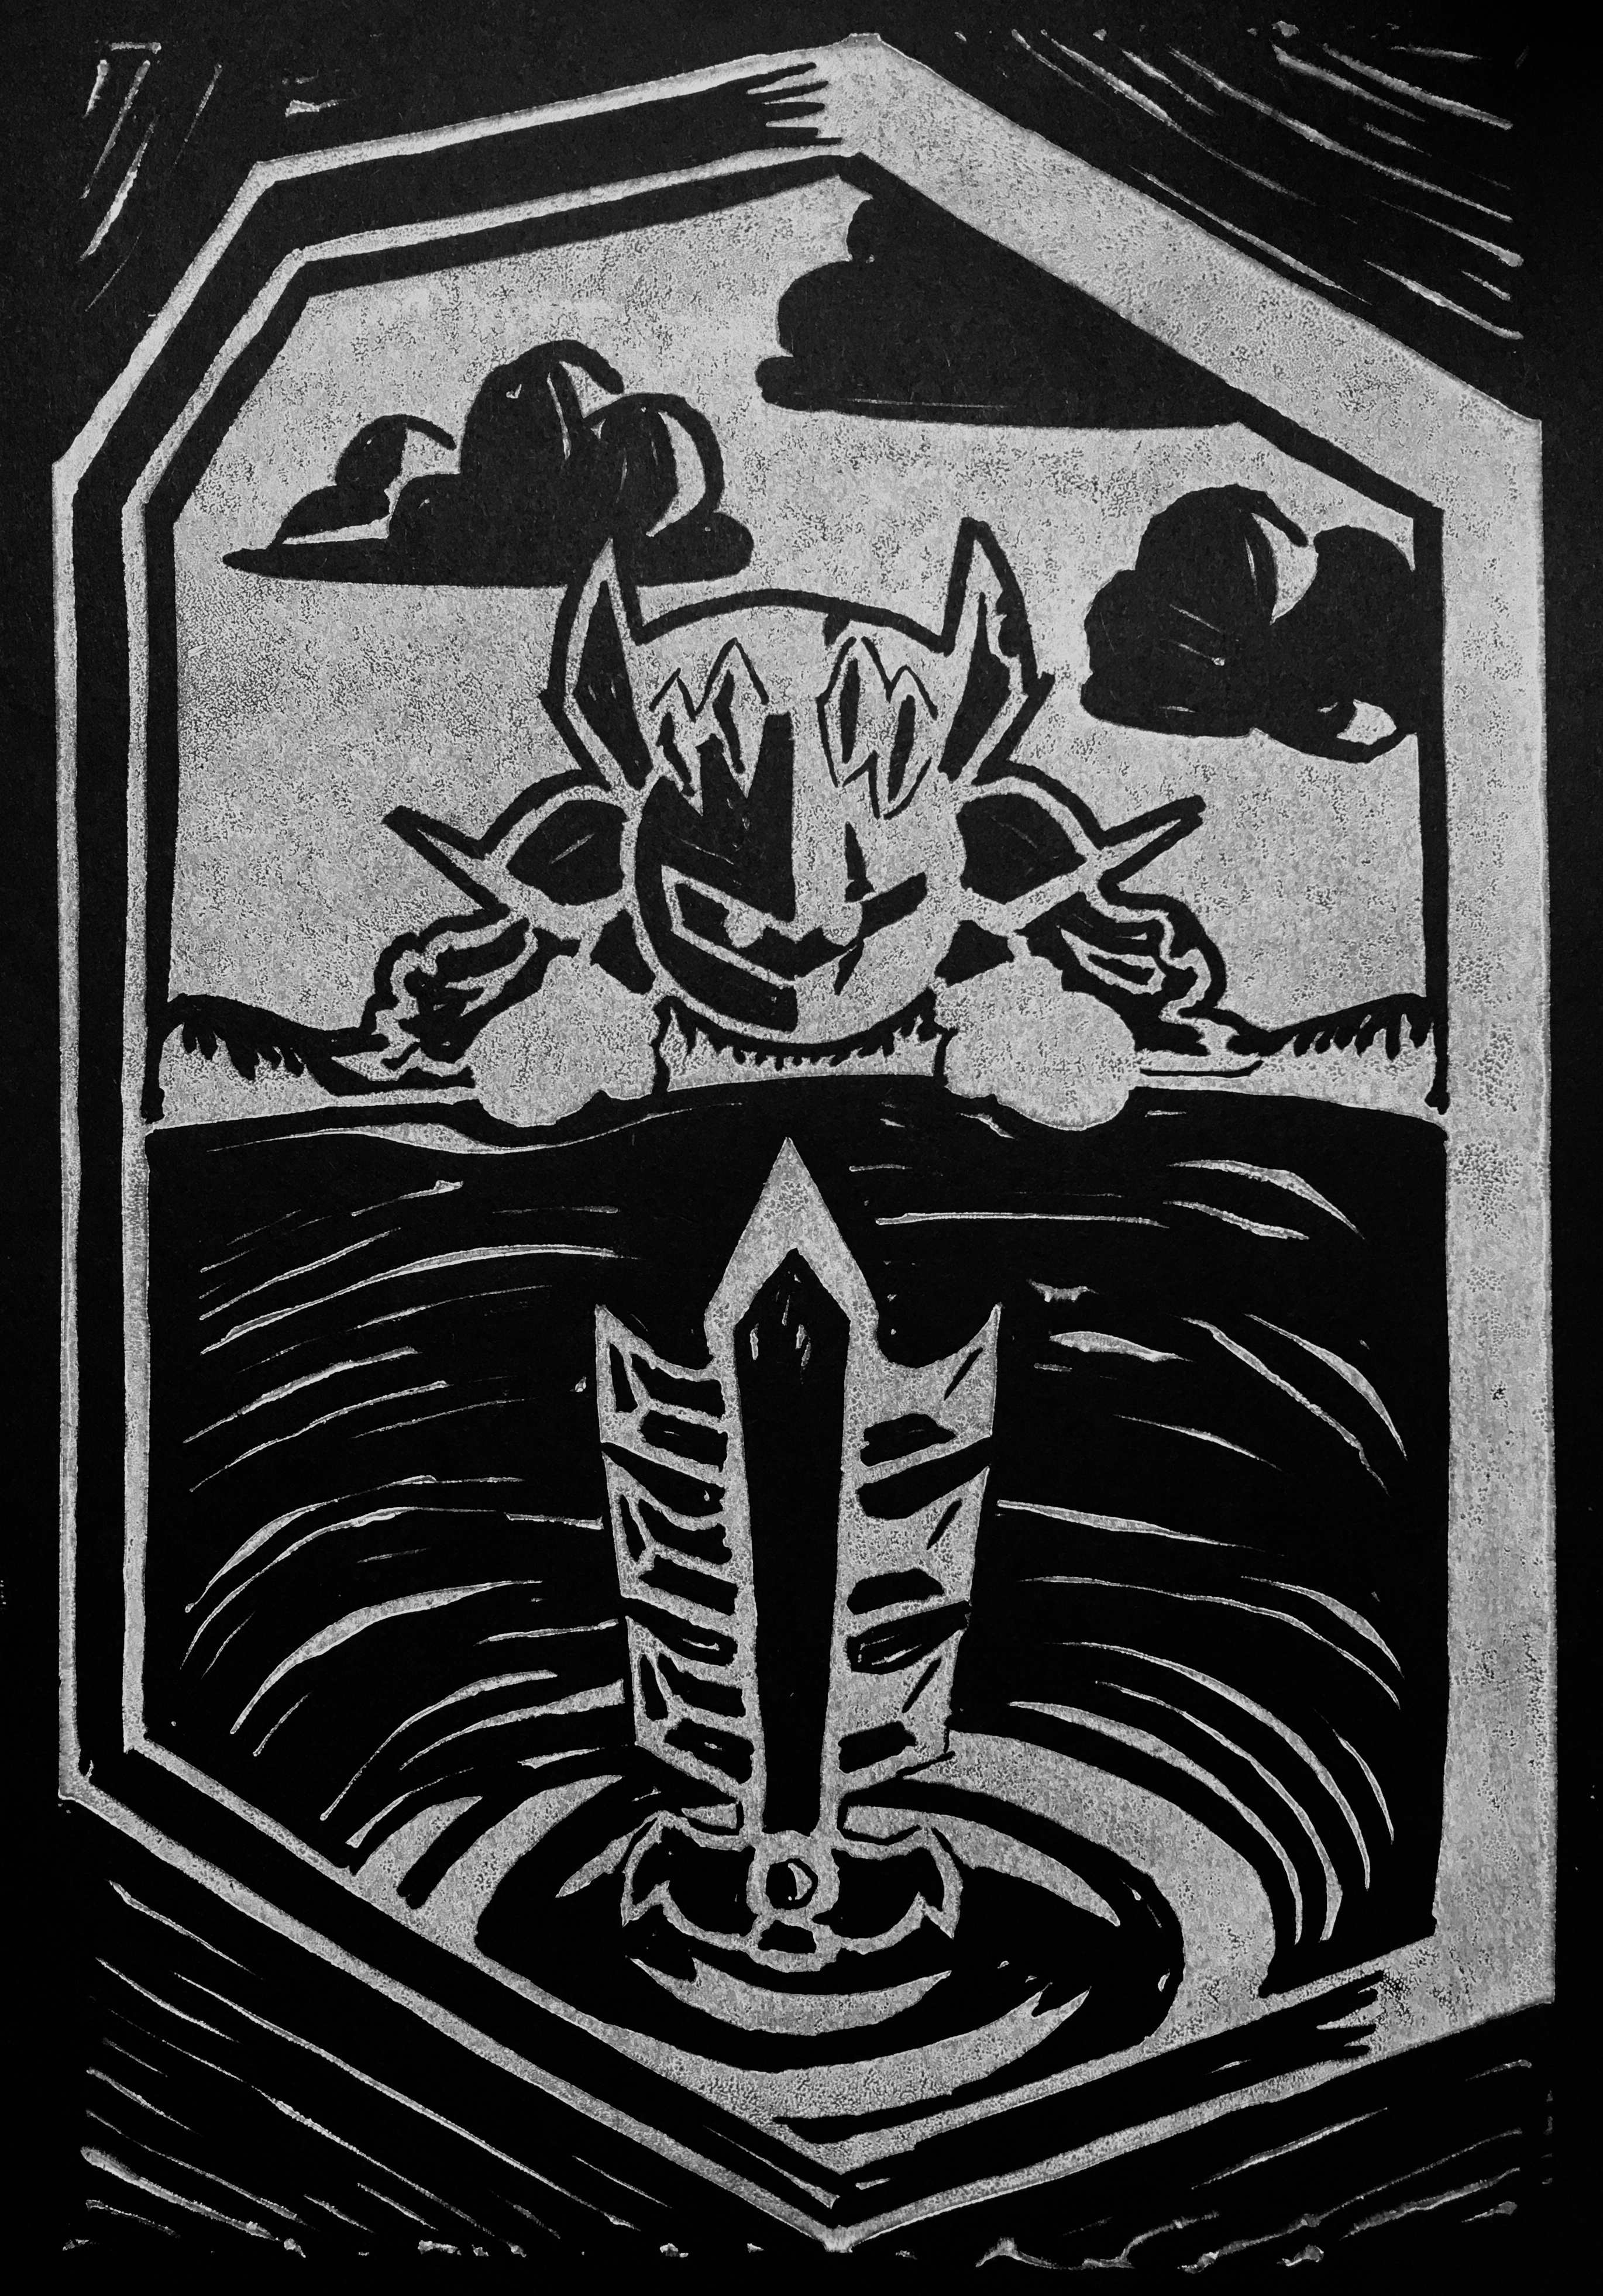 white ink blockprint on black paper depicting dark meta knight. he leans over a pool of water that ripples as his 6-pronged sword emerges from it. the sky is white with black clouds looming behind him. the scene takes place in a sharp-edged, asymmetrical mirror